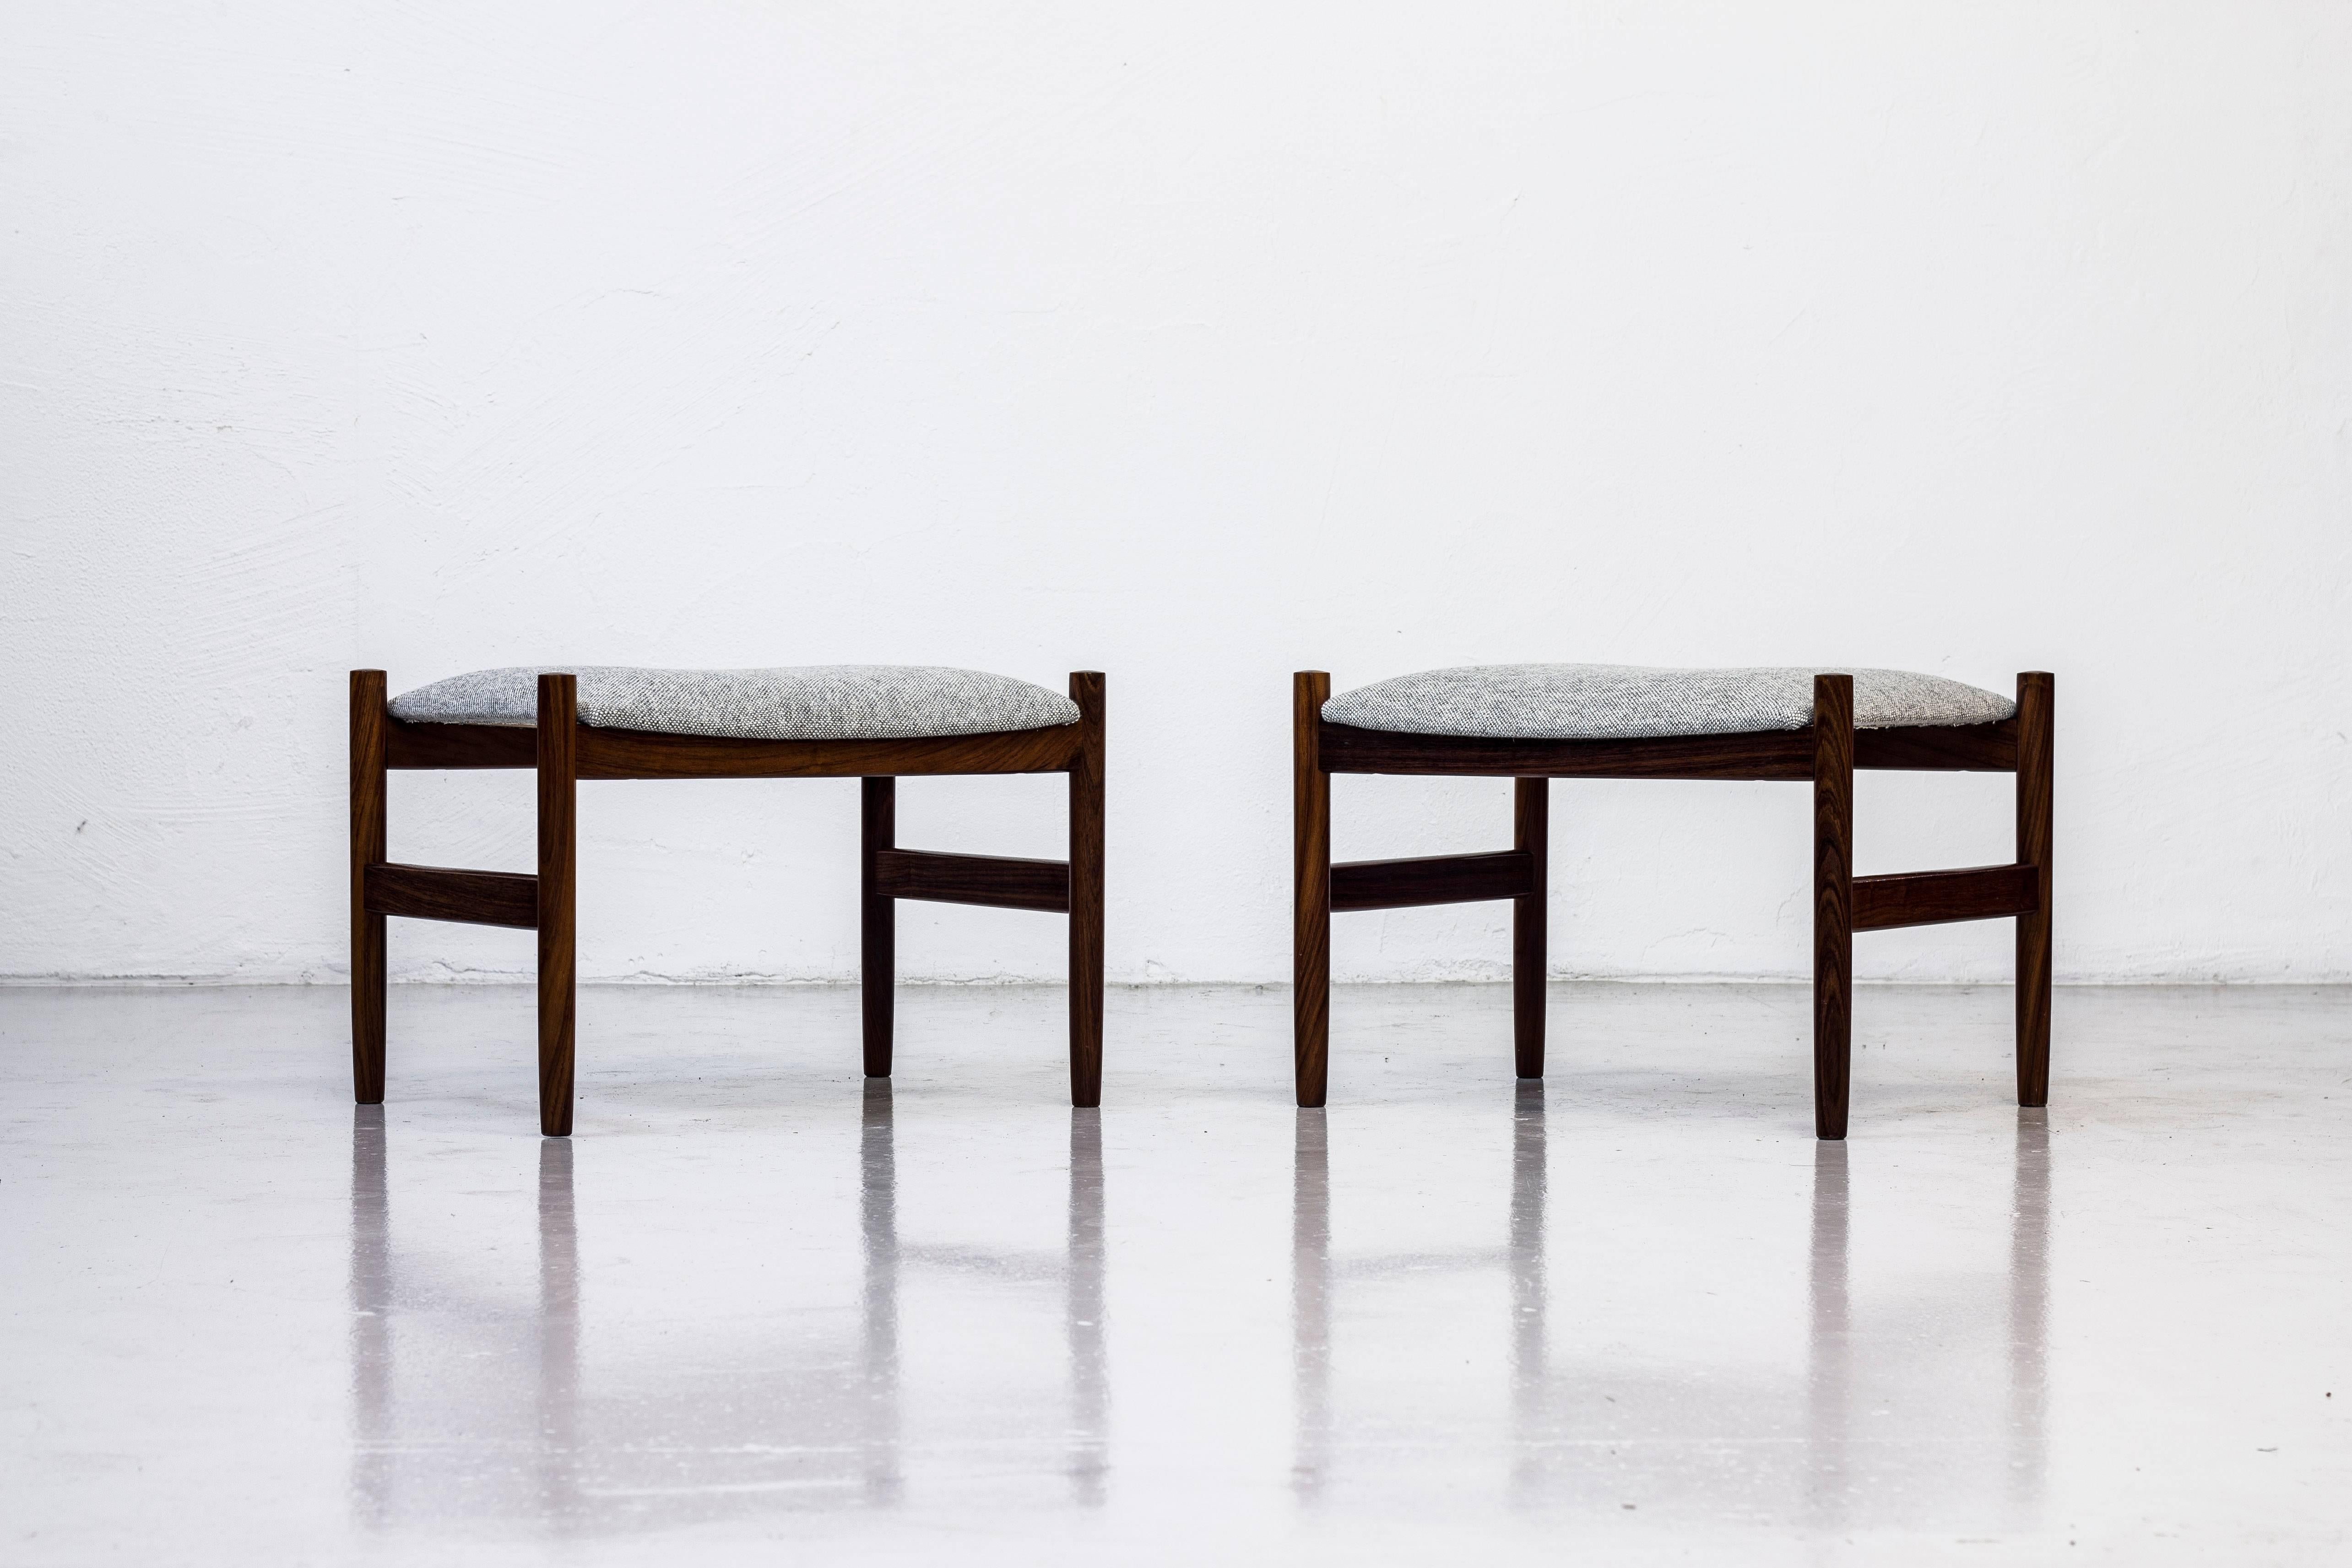 Pair of stools designed by Hugo Frandsen. Produced by his own company in Spøttrup, Denmark during the 1950s. Made from solid palisander with seats reupholstered in grey 